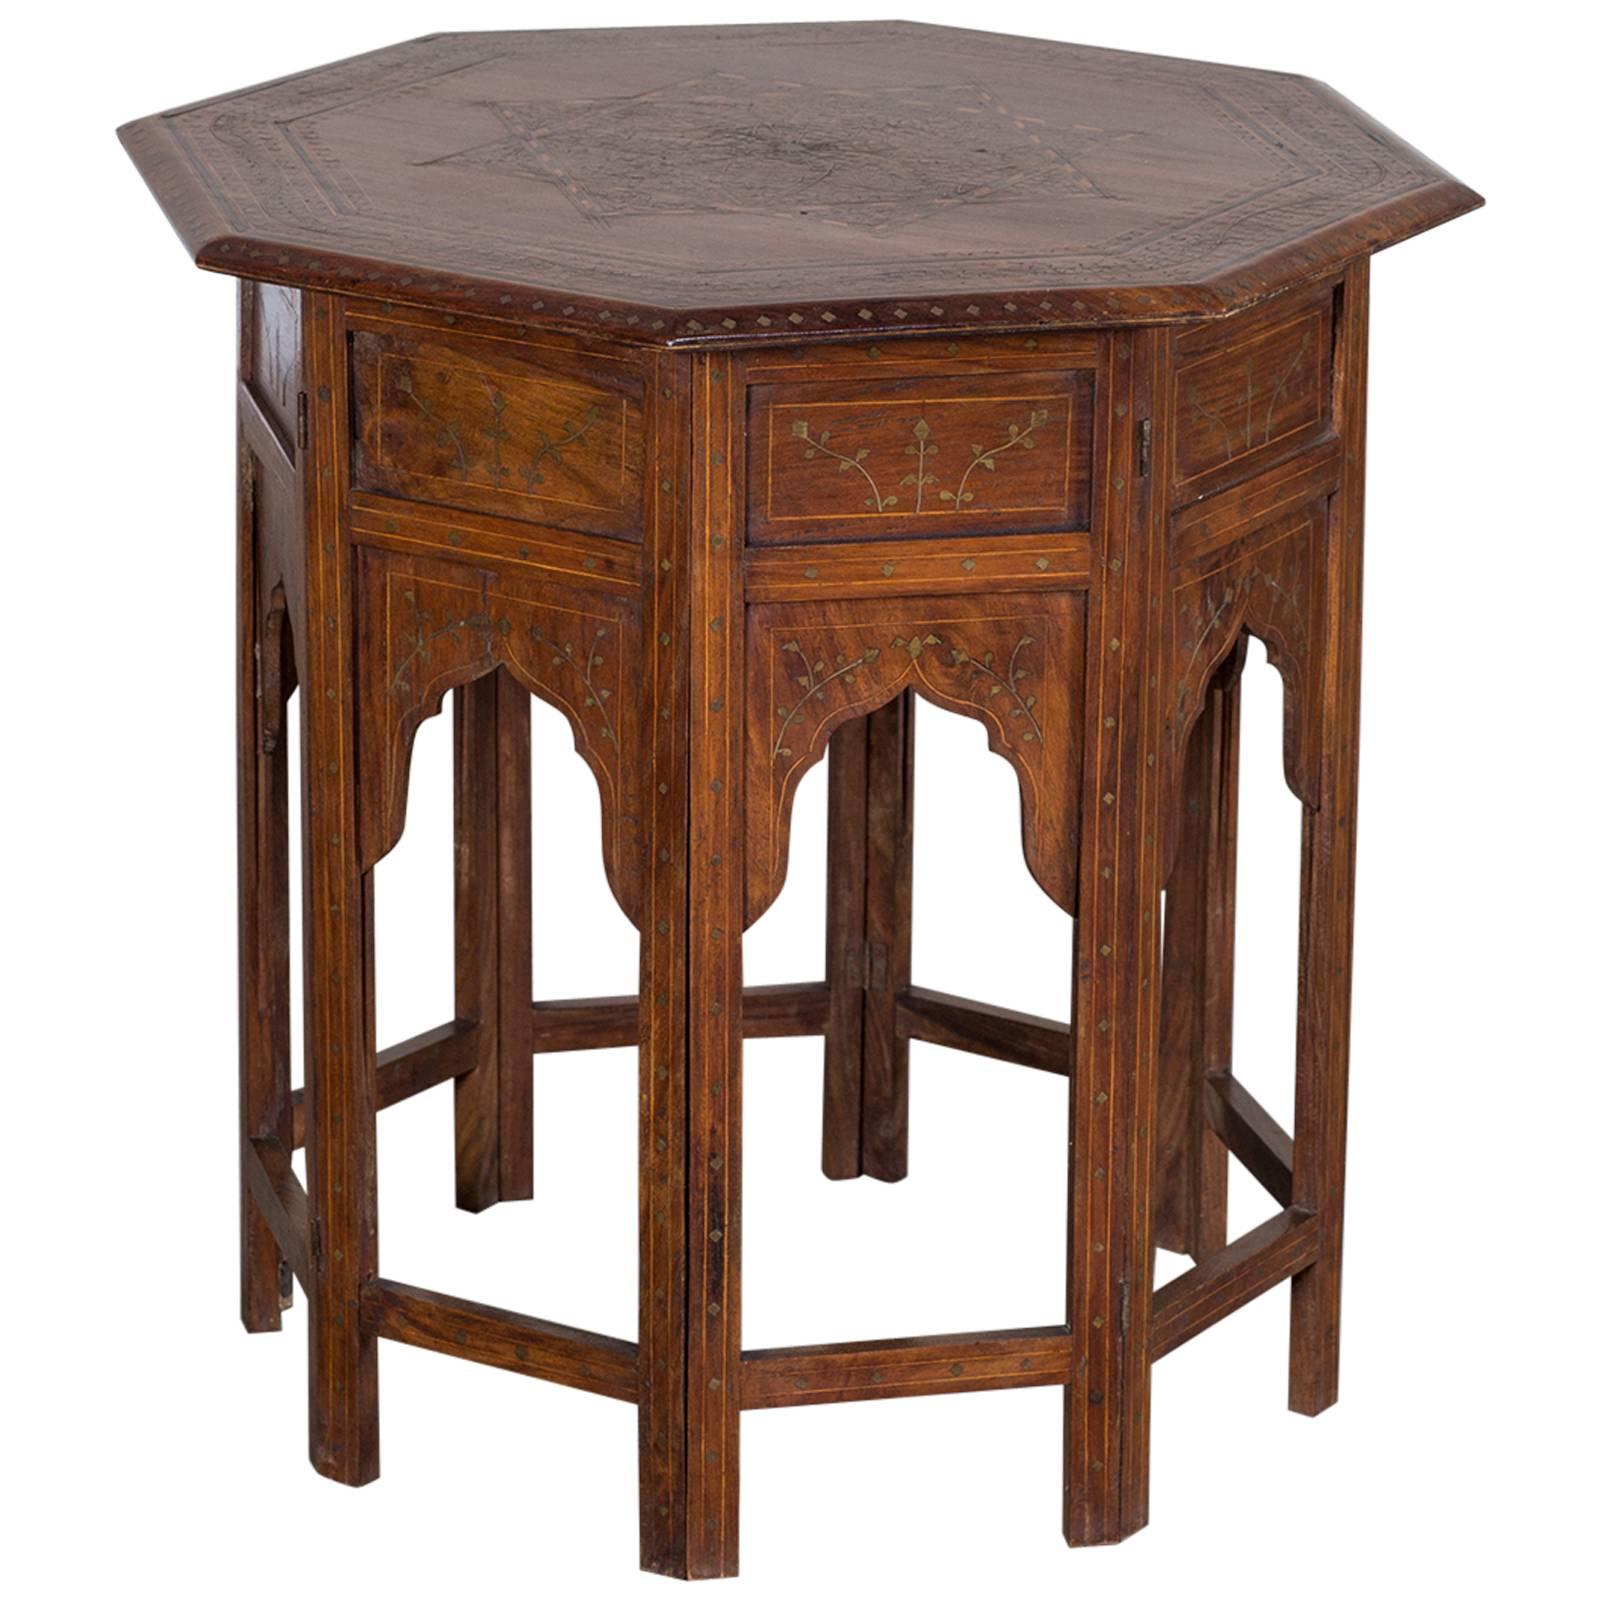 Antique Inlaid Rosewood, Ebony and Brass Hoshiapur Indian Table, circa 1890 For Sale